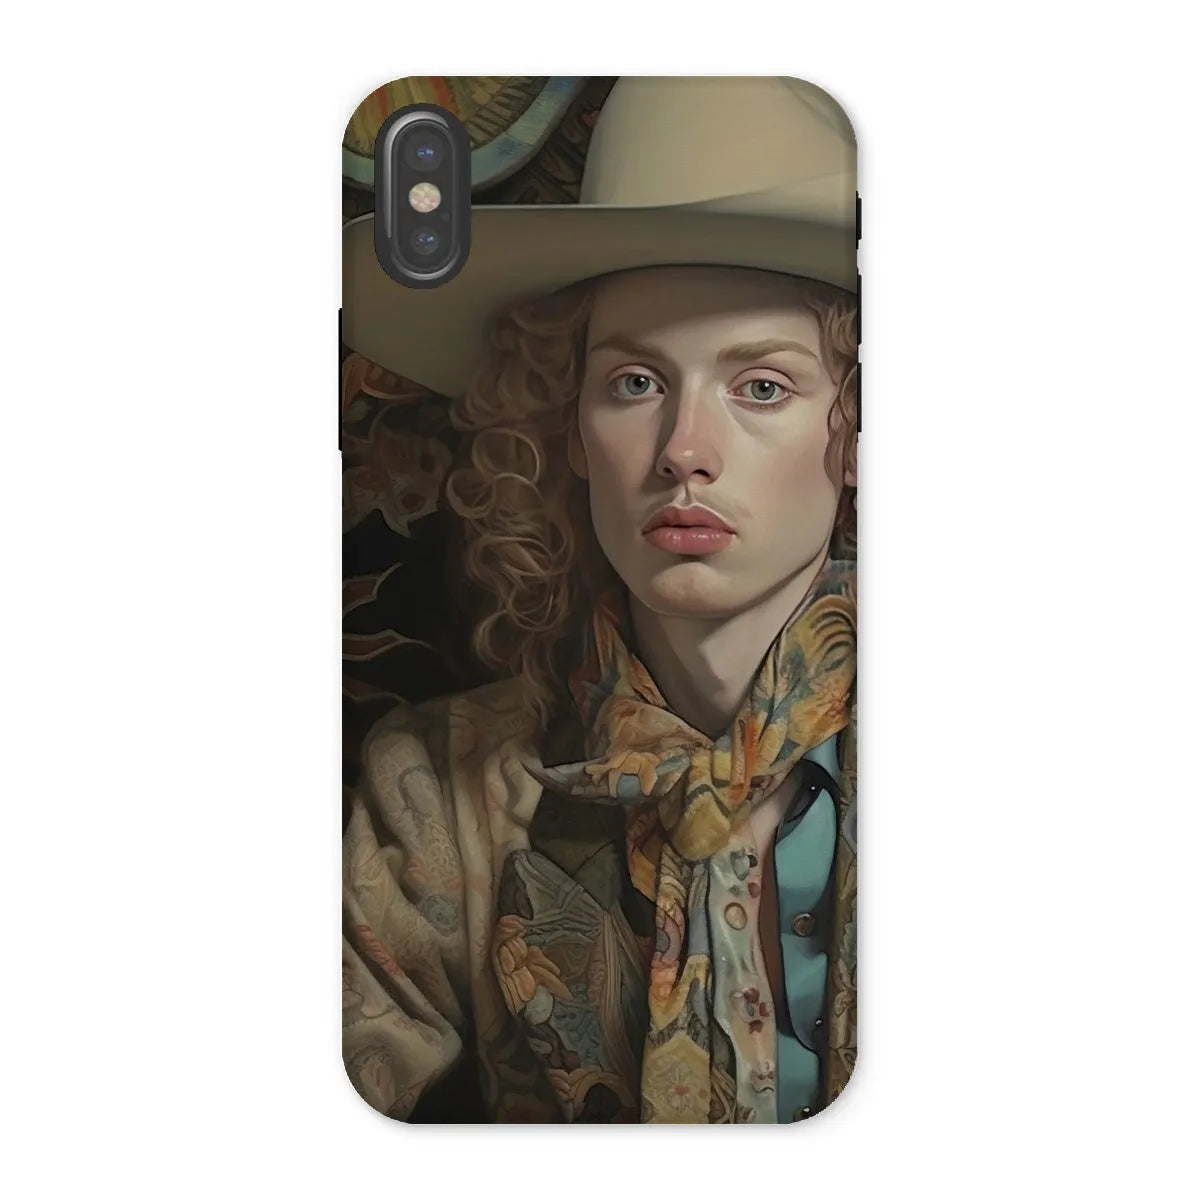 Ollie The Transgender Cowboy - F2m Dandy Outlaw Phone Case - Iphone x / Matte - Mobile Phone Cases - Aesthetic Art